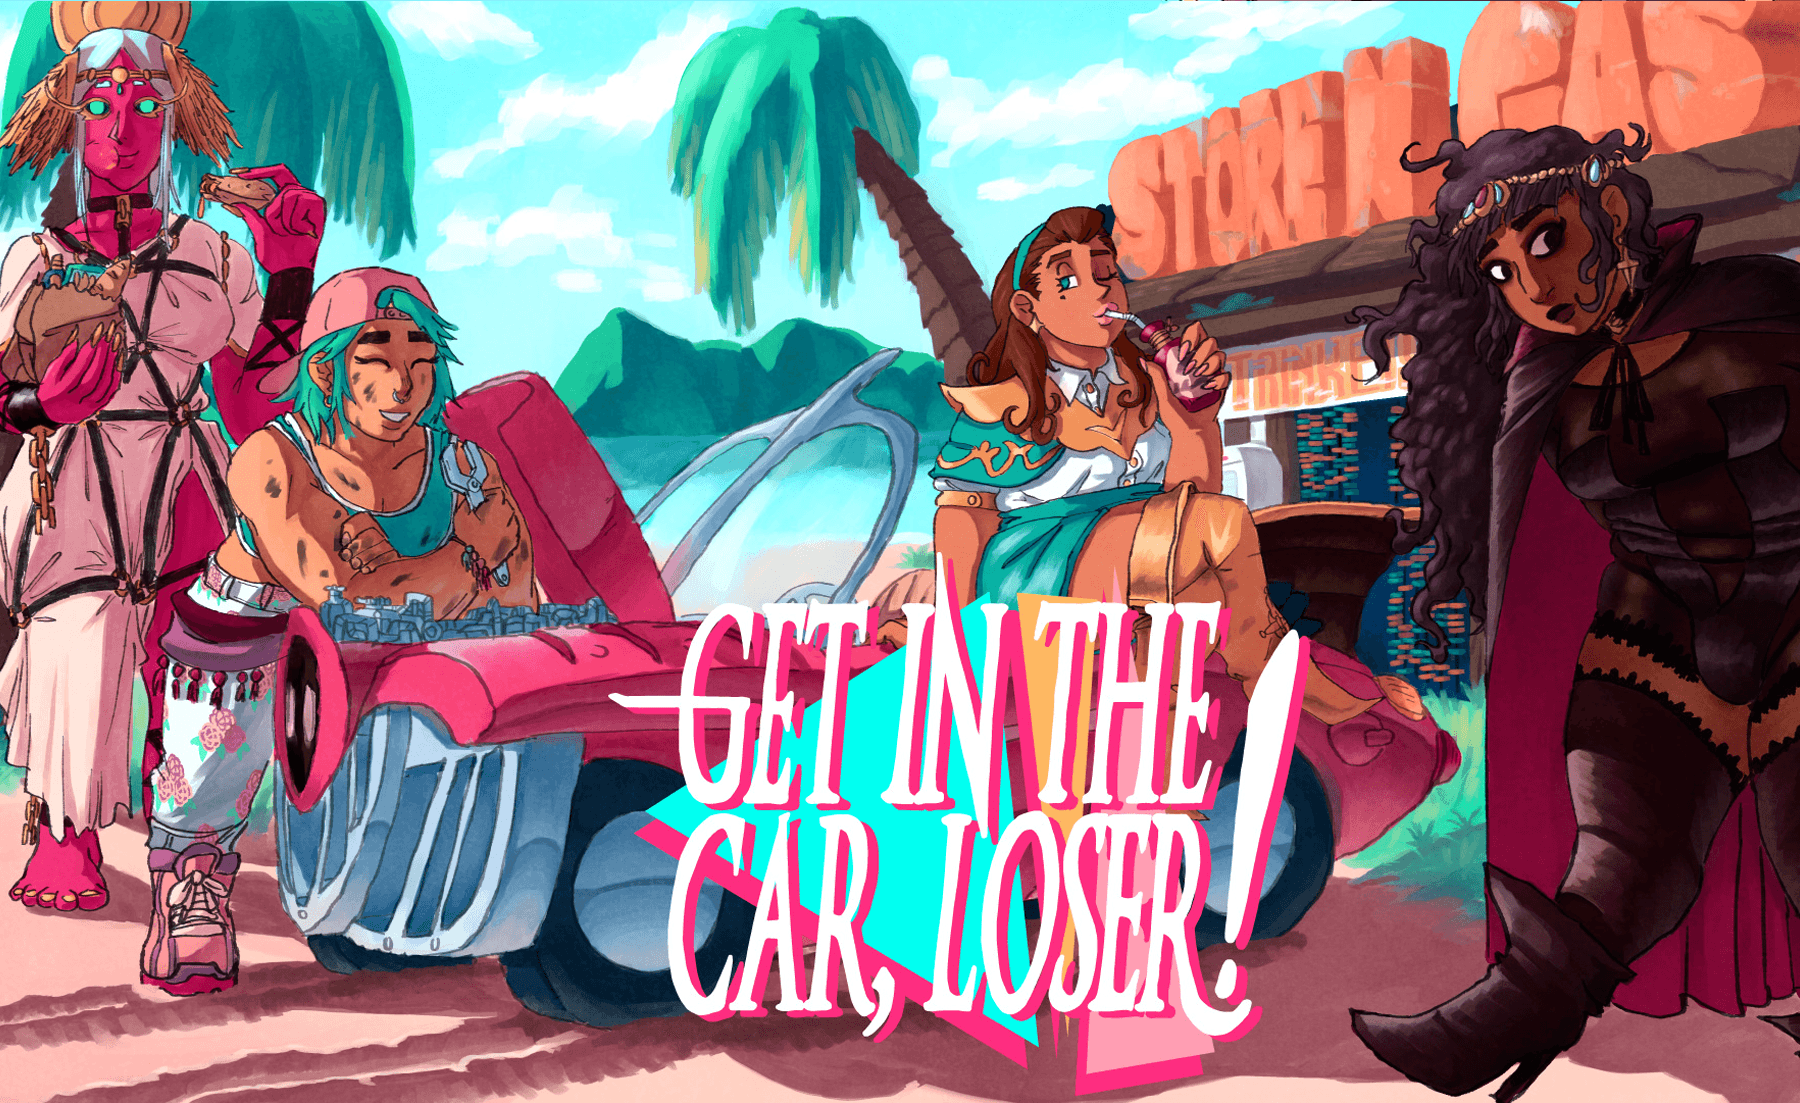 Get in The Car Loser